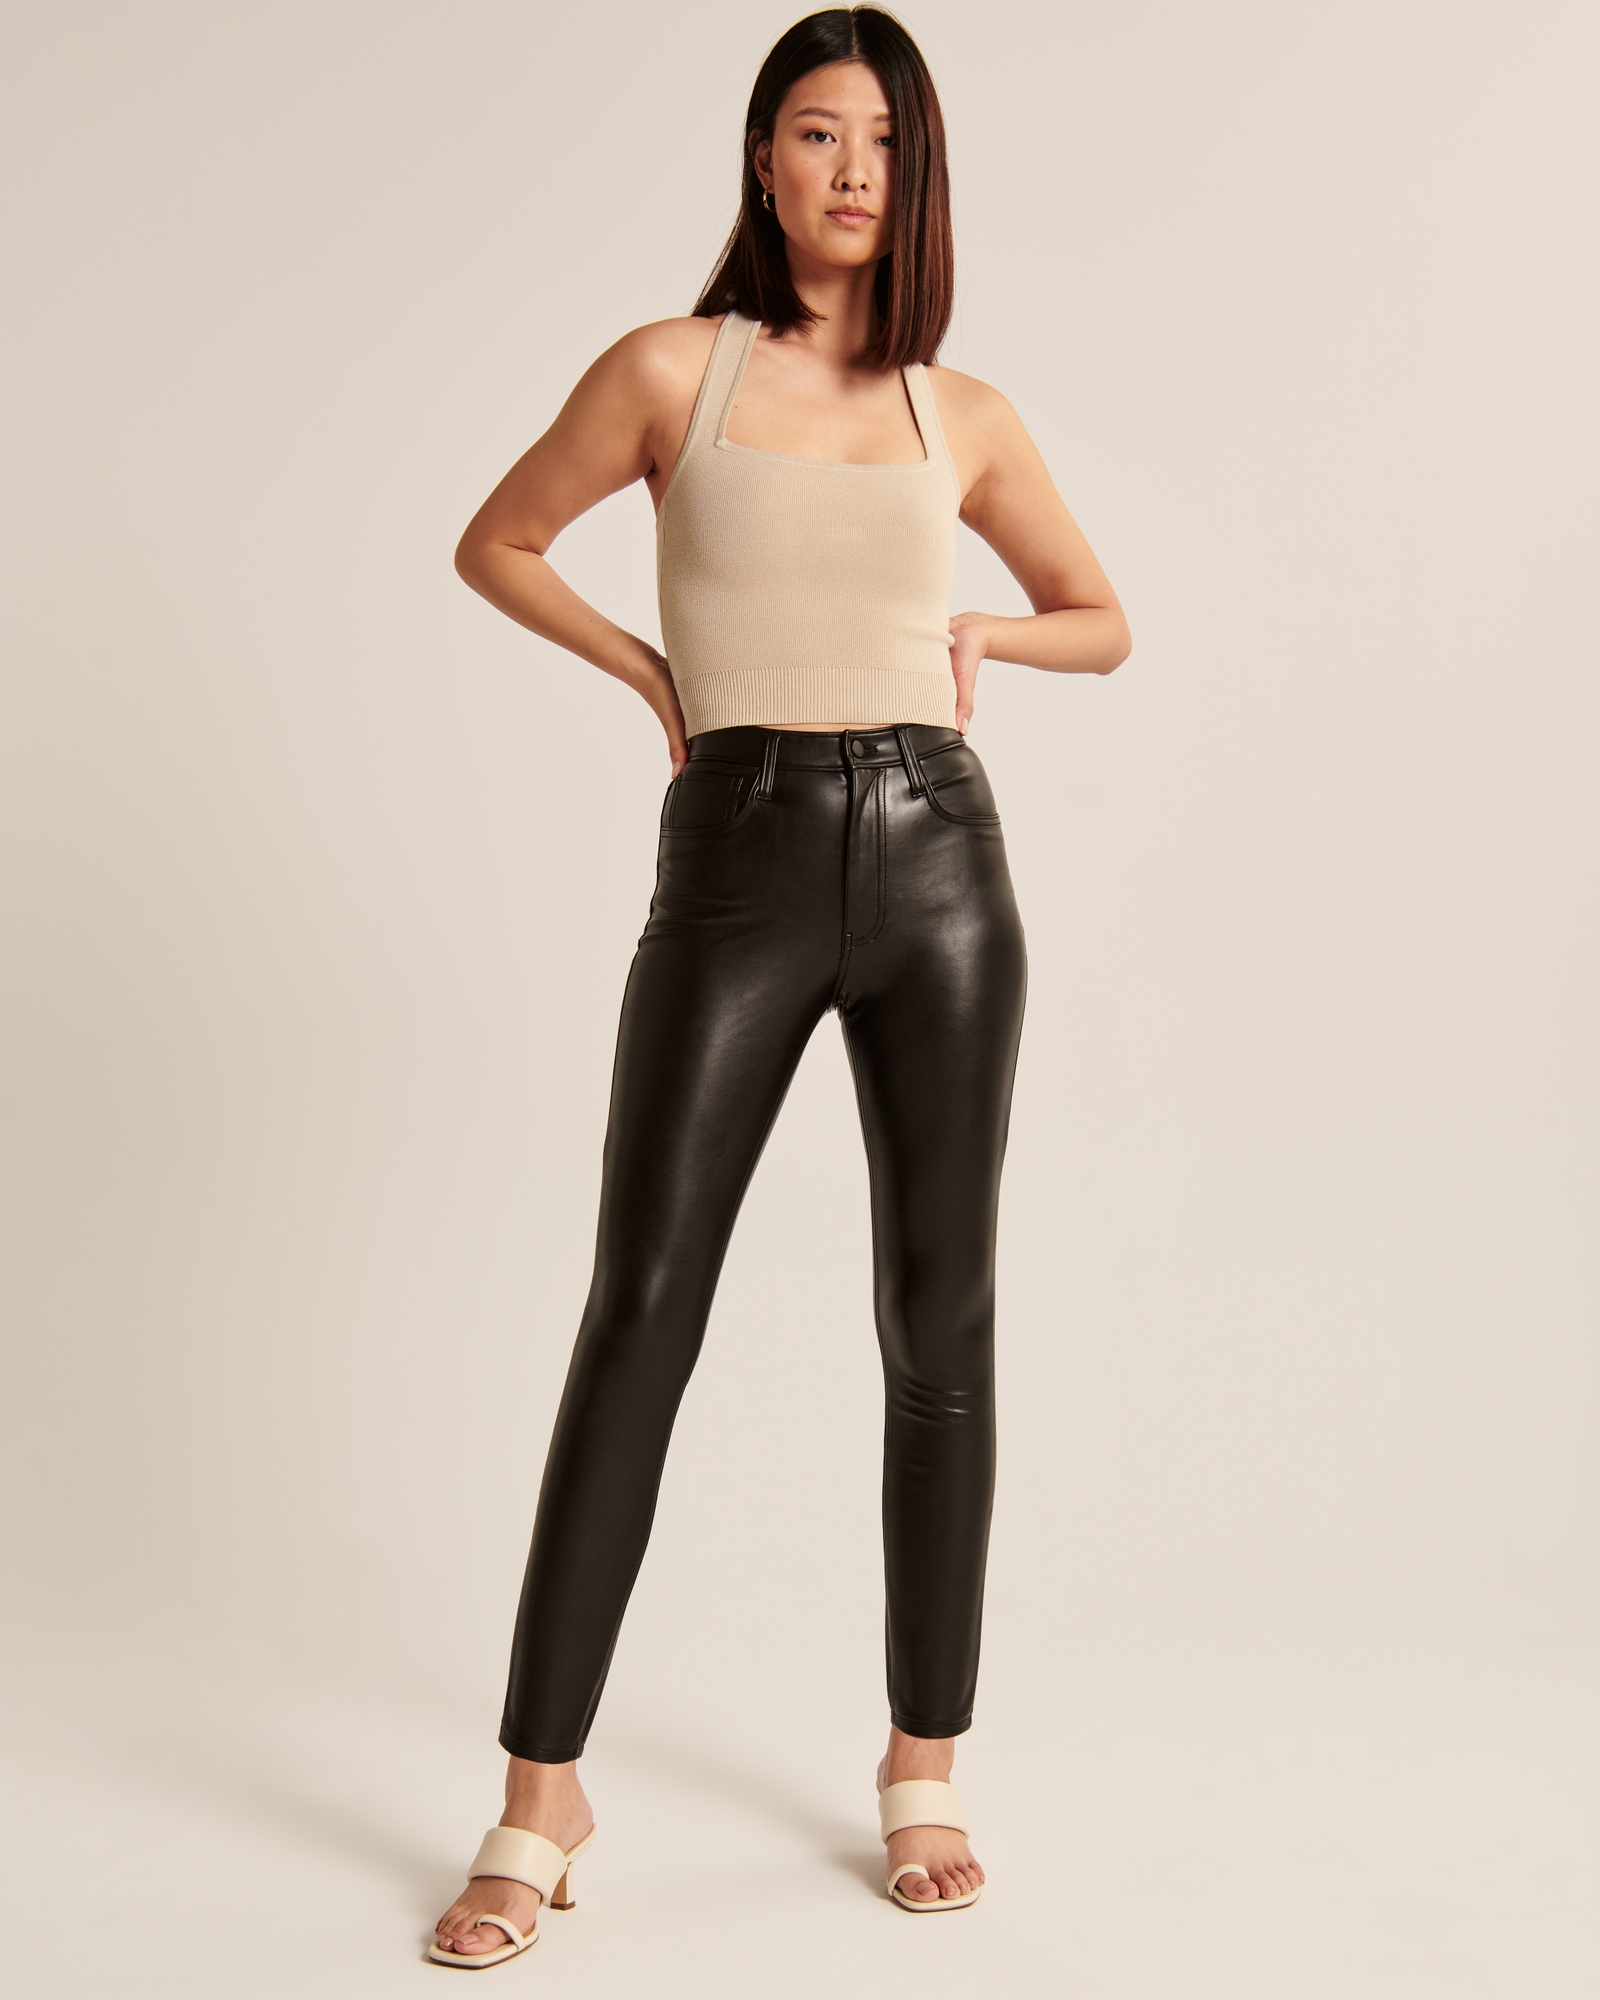 Women PU Leather Leggings Black Leather Pencil Pants Women High Waist Sexy  Skinny Thin Leather Trousers Leggings -  Canada